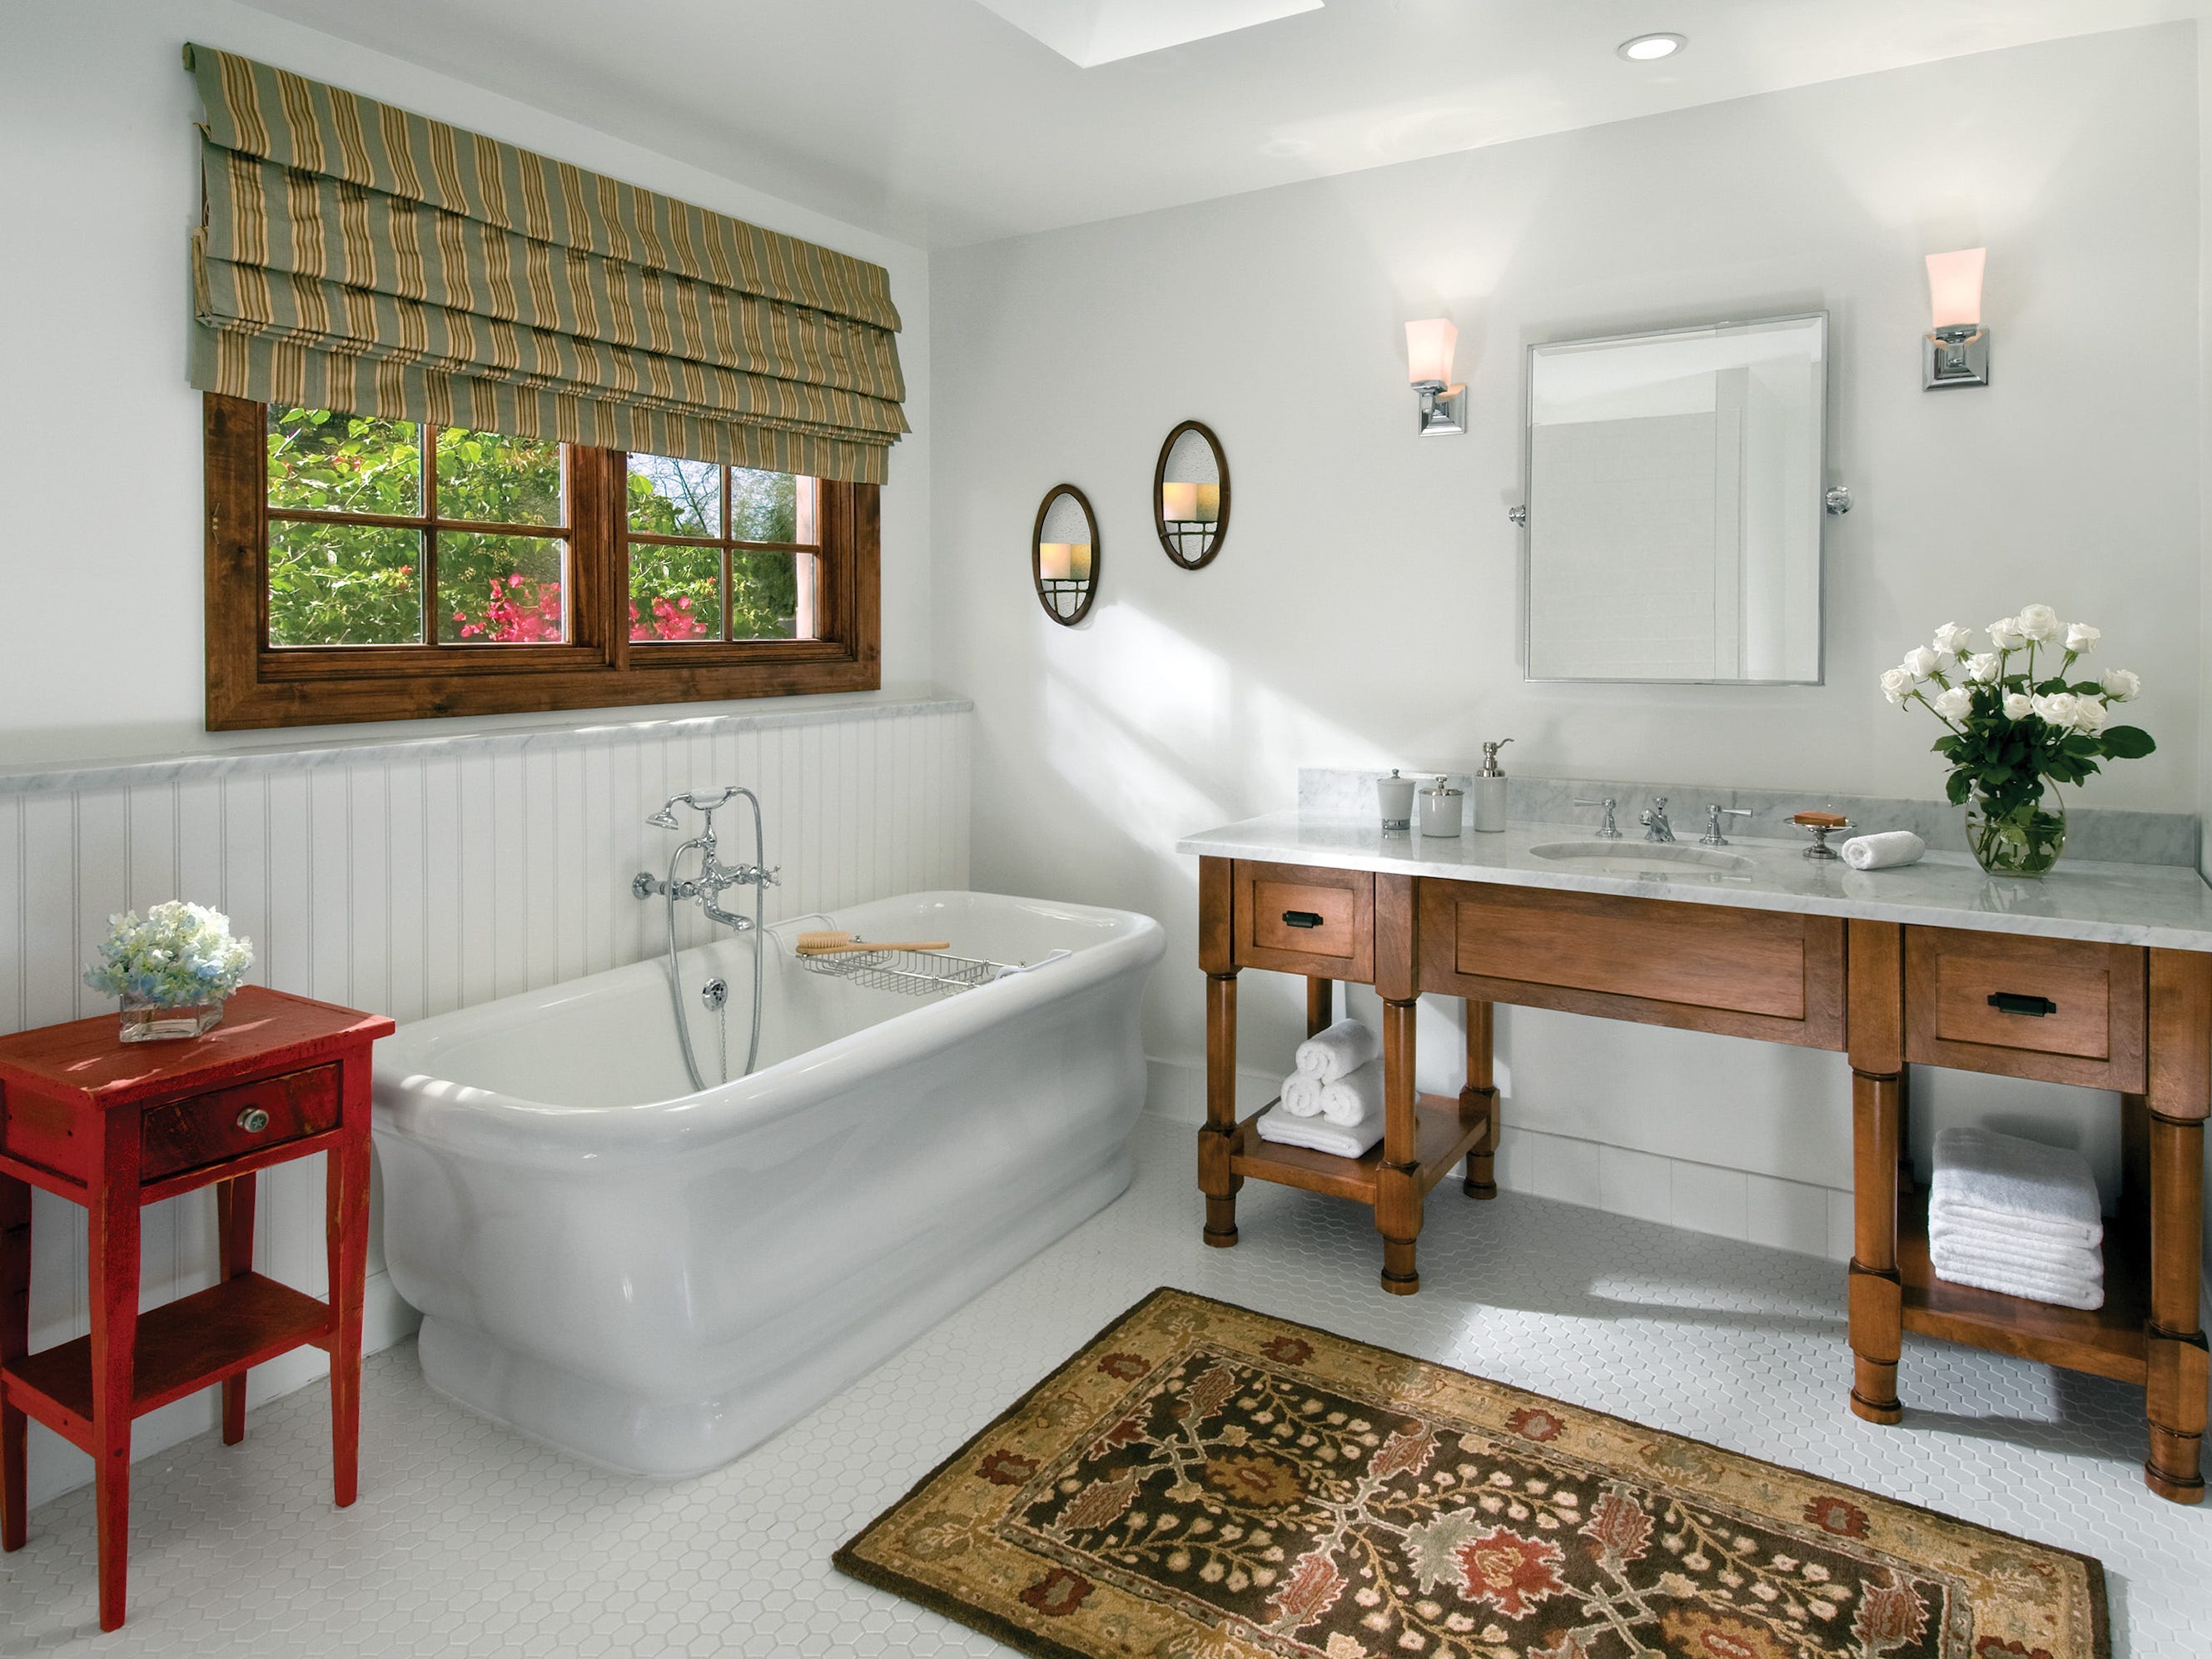 <p>Apart from the style, the bathroom at the Hermosa Inn was much like the Phoenician's. It was spacious, with a roomy shower and a soaking tub.</p>